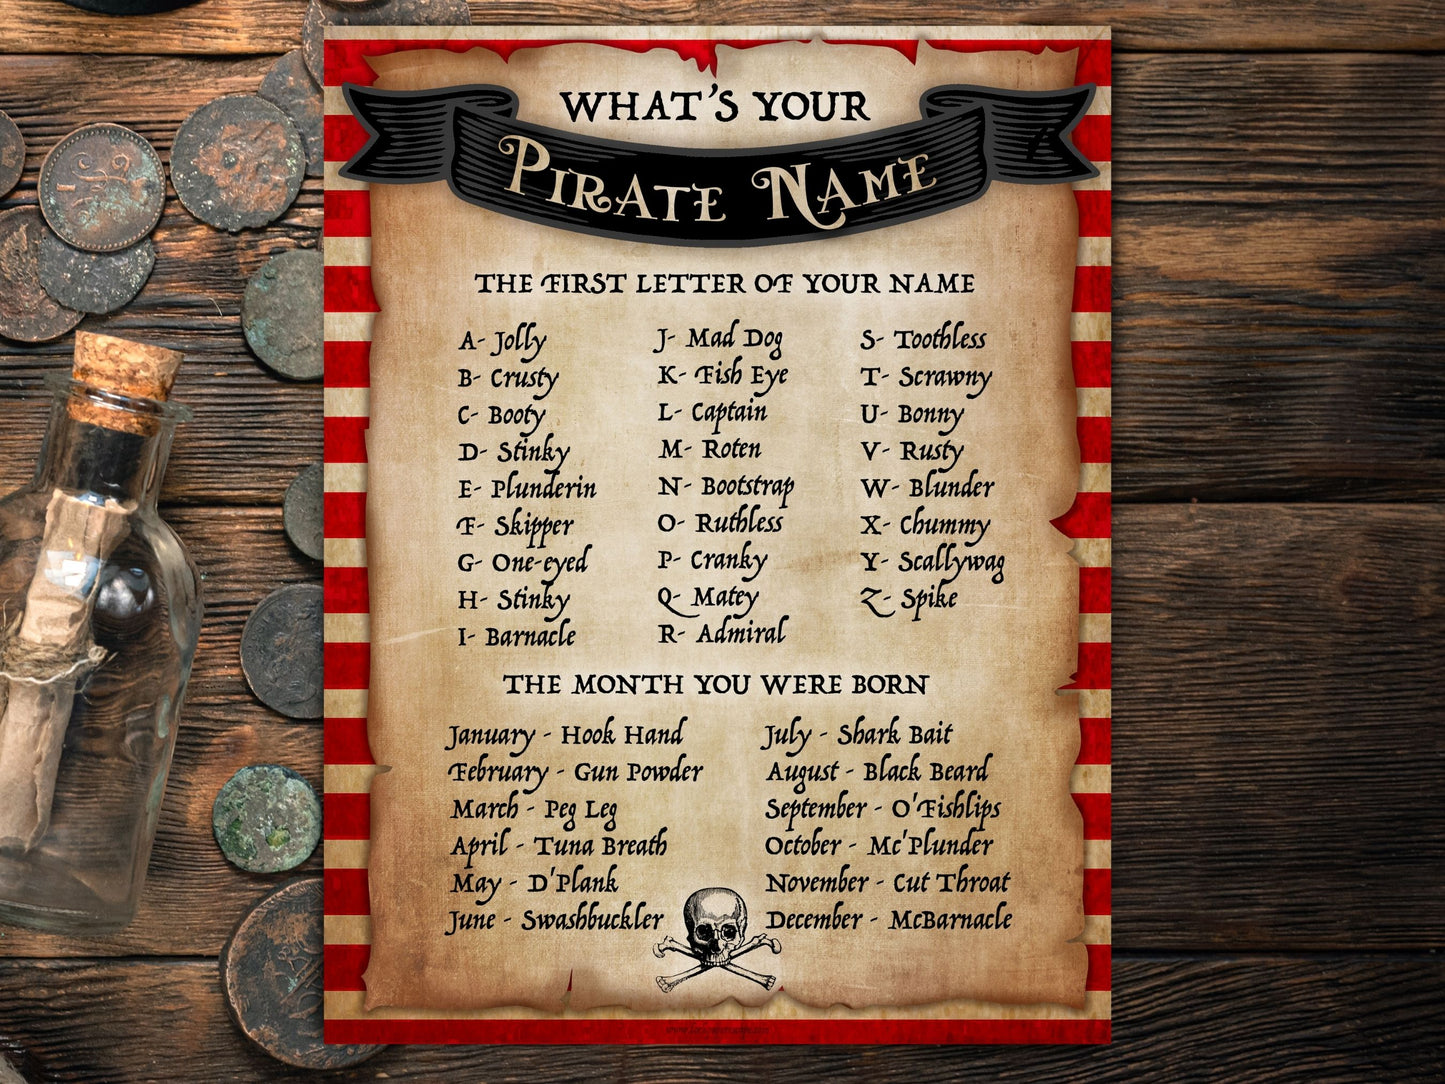 What's Your Pirate Name?